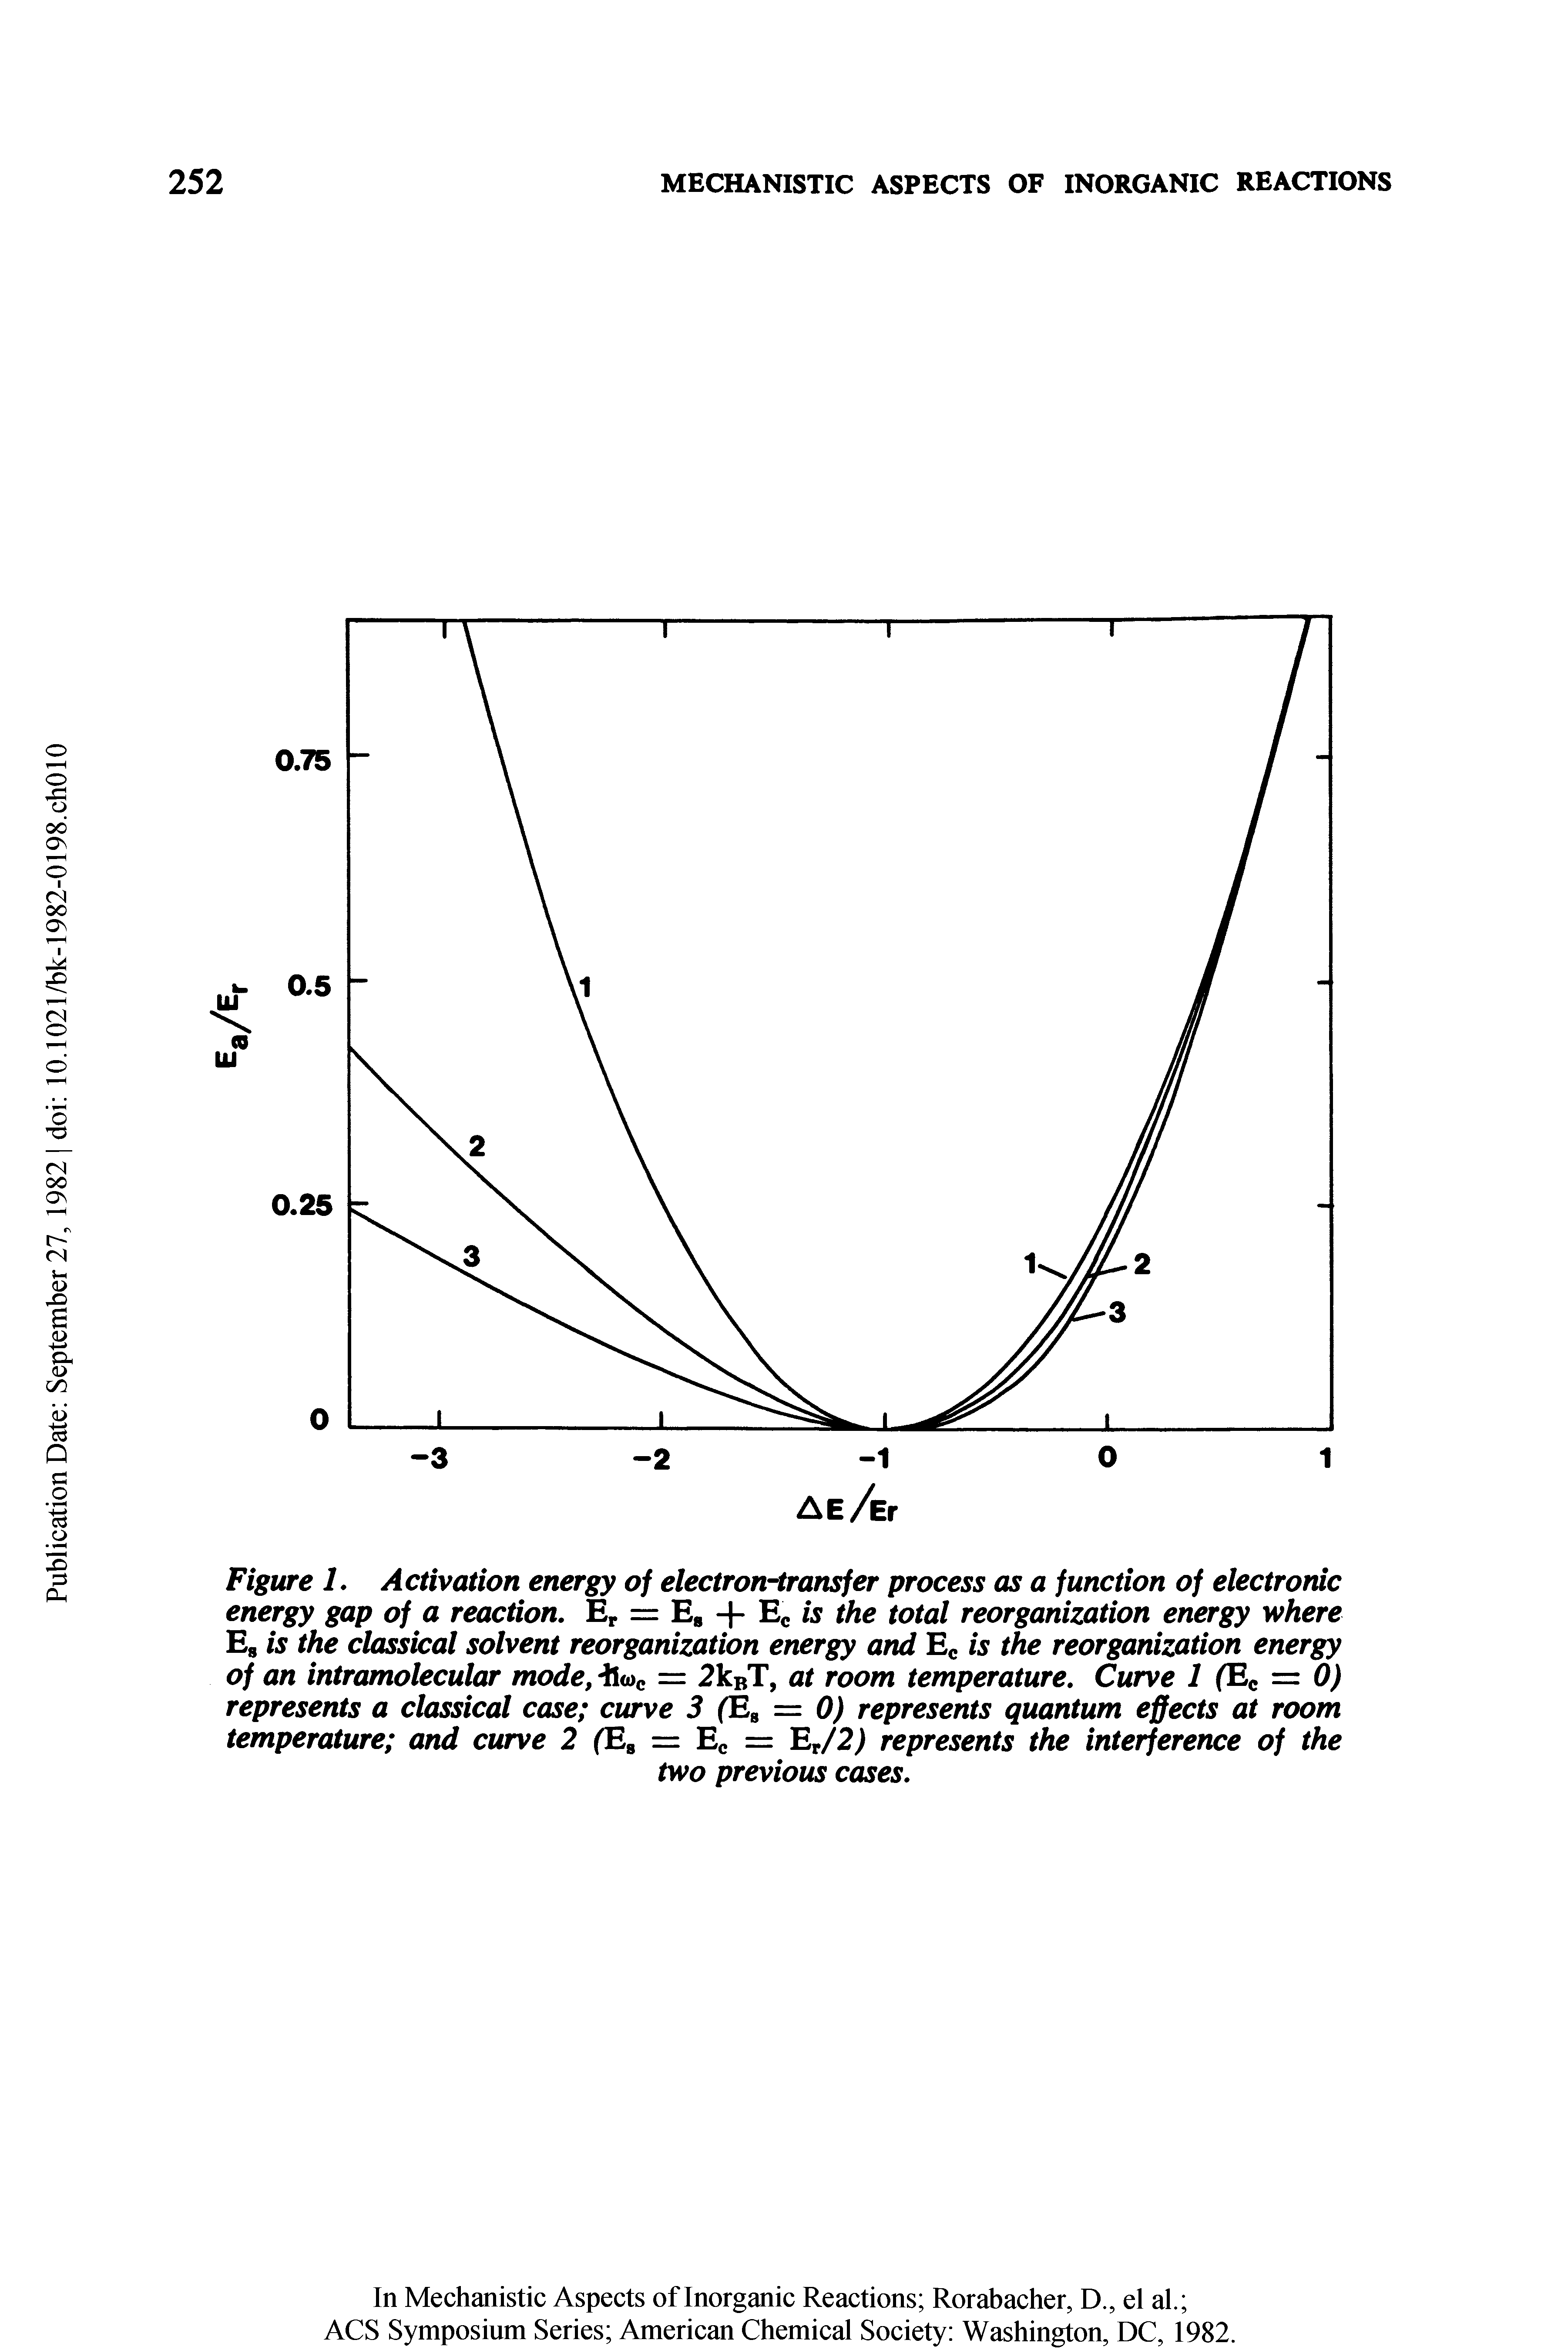 Figure 1. Activation energy of electron-transfer process as a function of electronic energy gap of a reaction. Er = Eg + Ec is the total reorganization energy where Es is the classical solvent reorganization energy and Ec is the reorganization energy of an intramolecular mode, l<oc = 2kBT, at room temperature. Curve 1 (Ec = 0) represents a classical case curve 3 (Ea = 0) represents quantum effects at room temperature and curve 2 (Eg = Ec = EJ2) represents the interference of the...